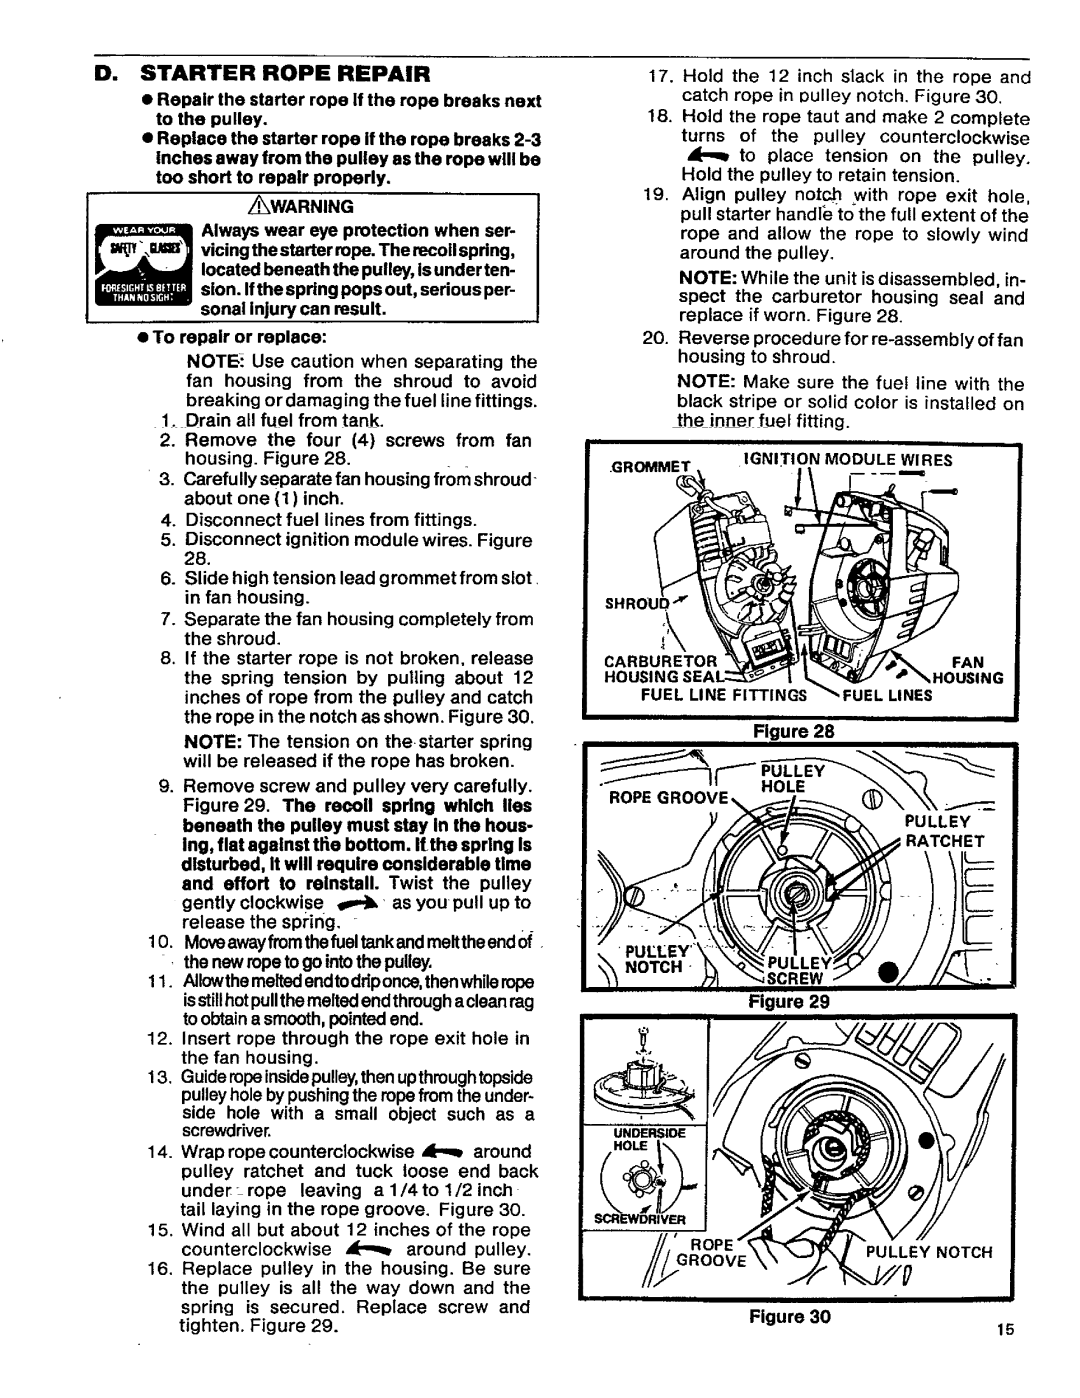 Craftsman 358.796131- 26.2CC operating instructions D. Starter Rope Repair, o., ,o 